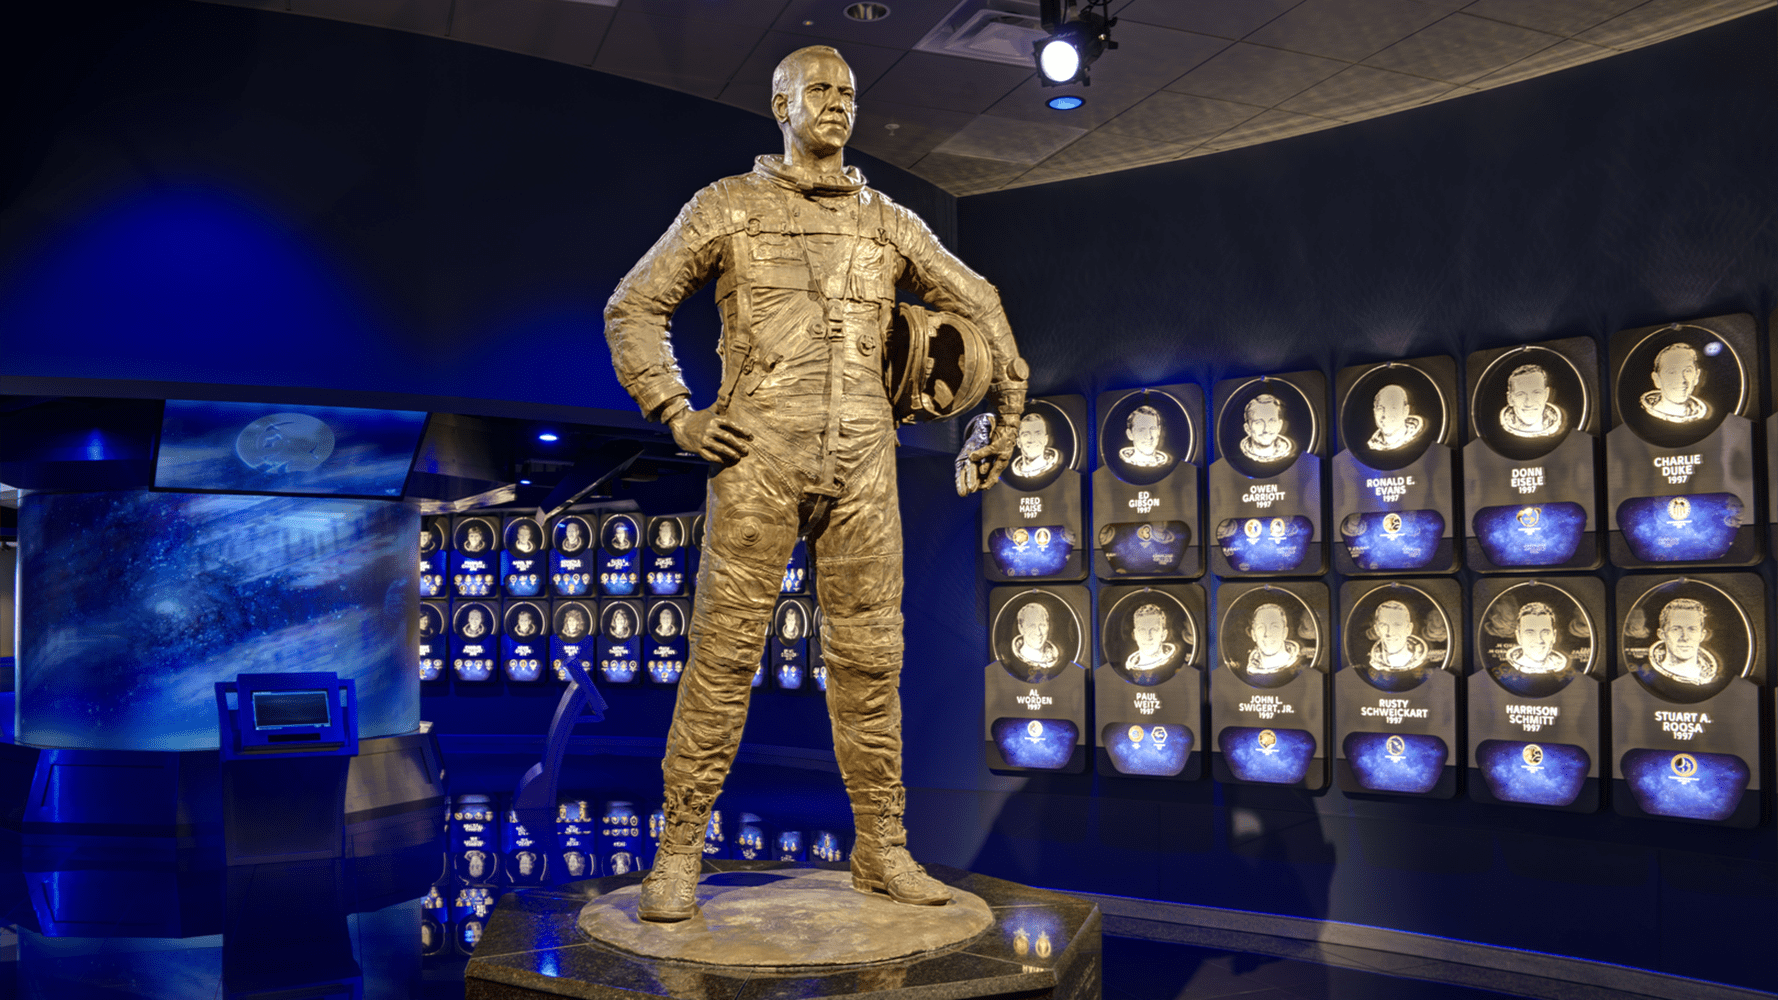 Gold astronaut statue in purple room with black/white pictures on the wall